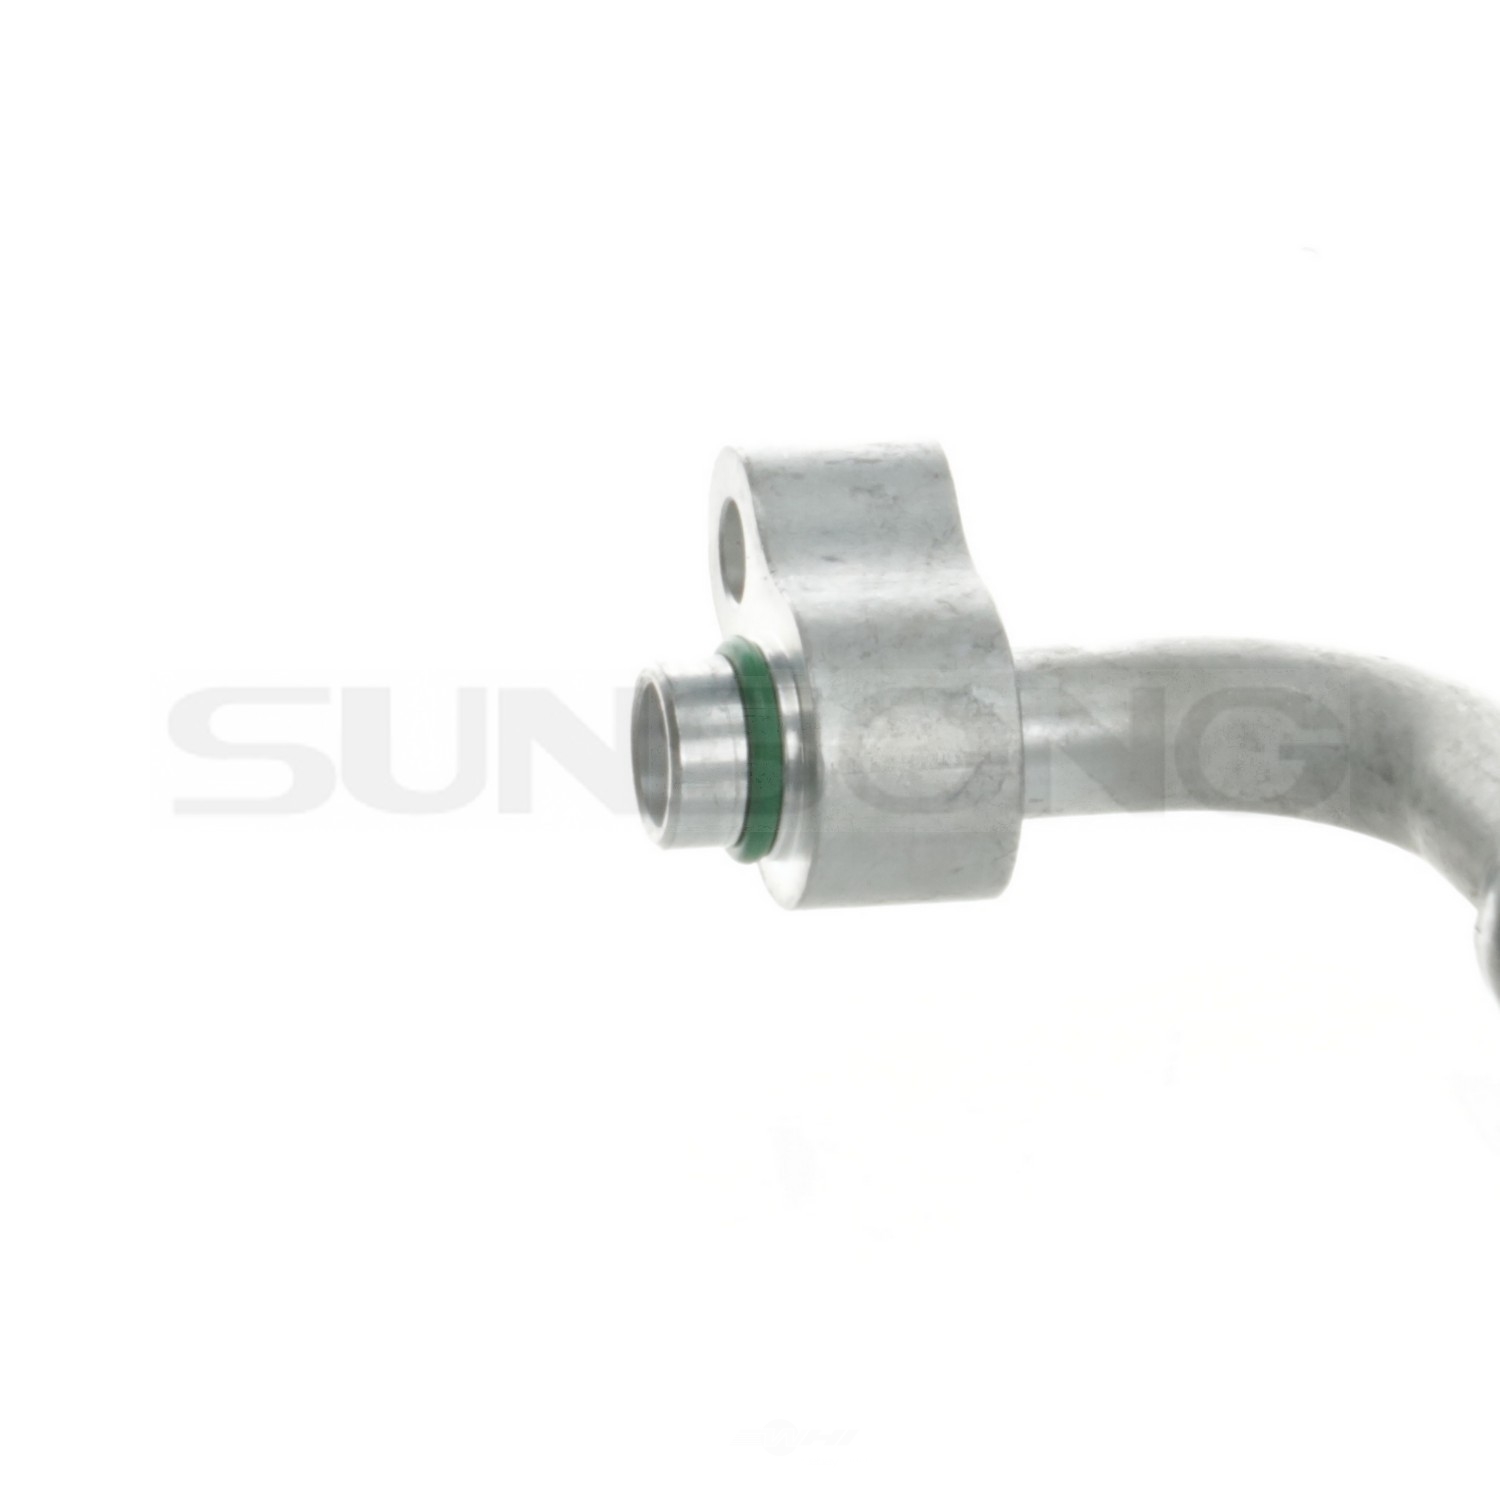 SUNSONG NORTH AMERICA - A/C Refrigerant Discharge / Suction Hose Assembly - SUG 5203018